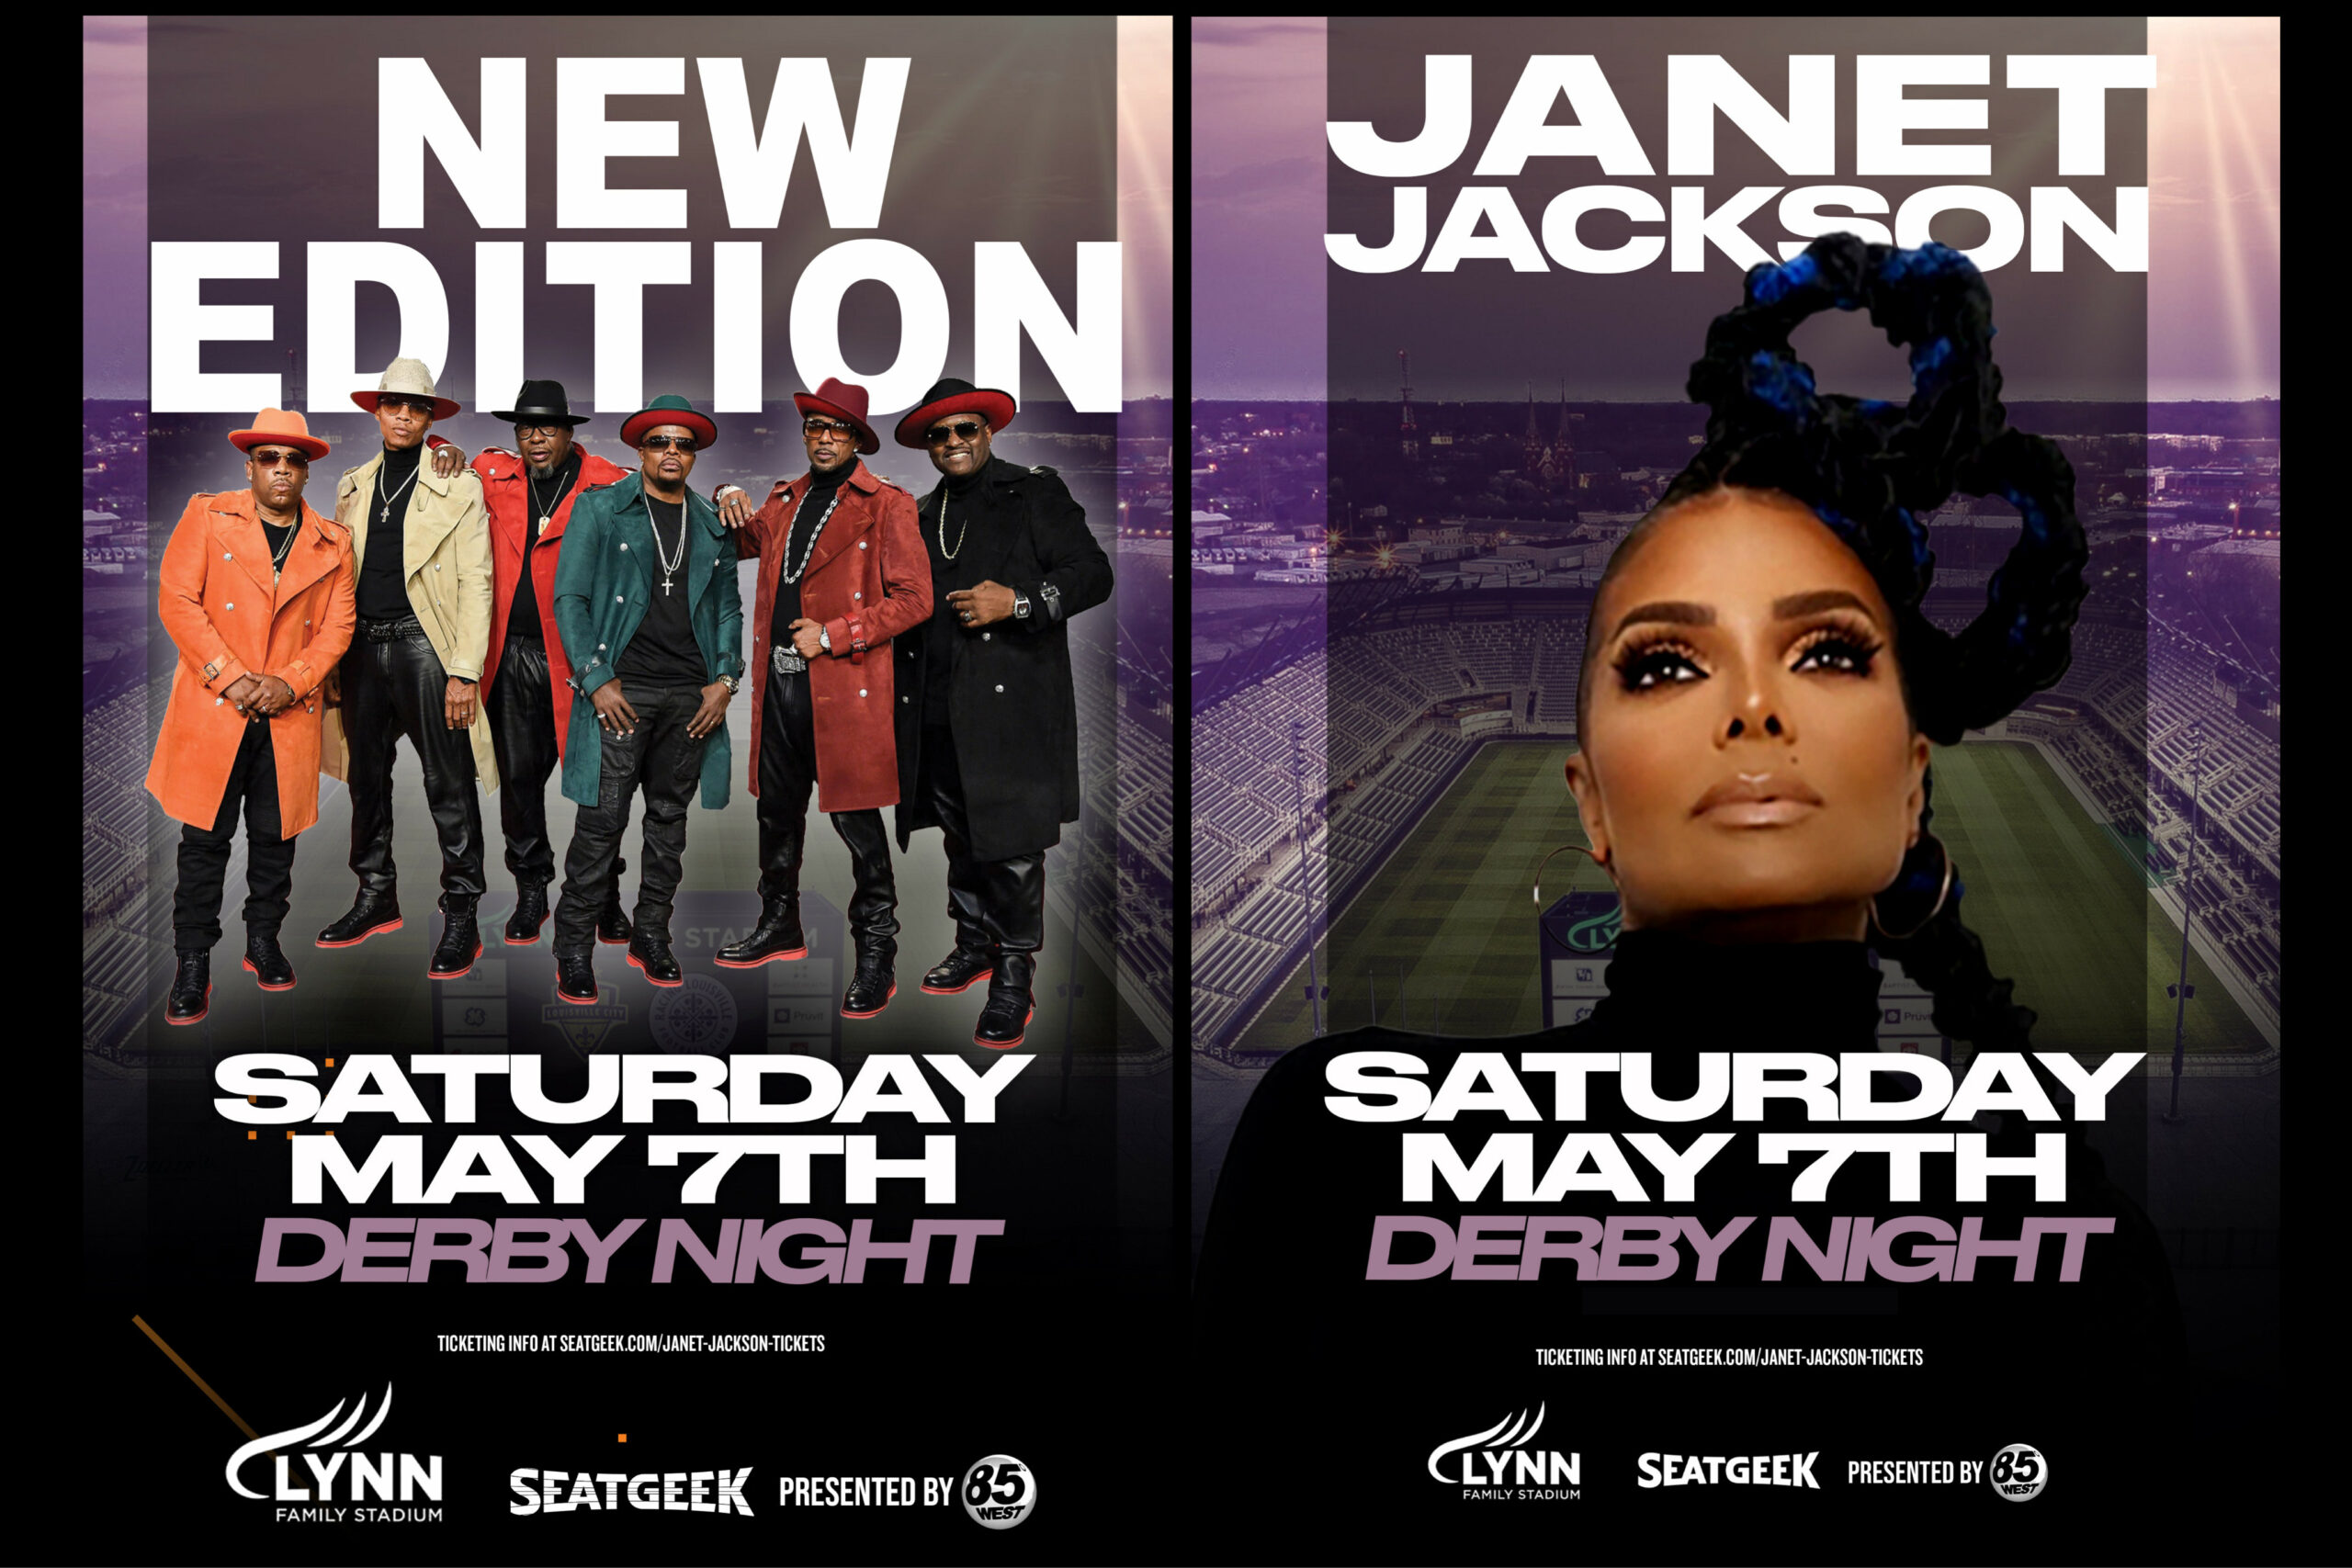 <h1 class="tribe-events-single-event-title">85° West Music Festival presents Janet Jackson and New Edition- Discount Code Here</h1>